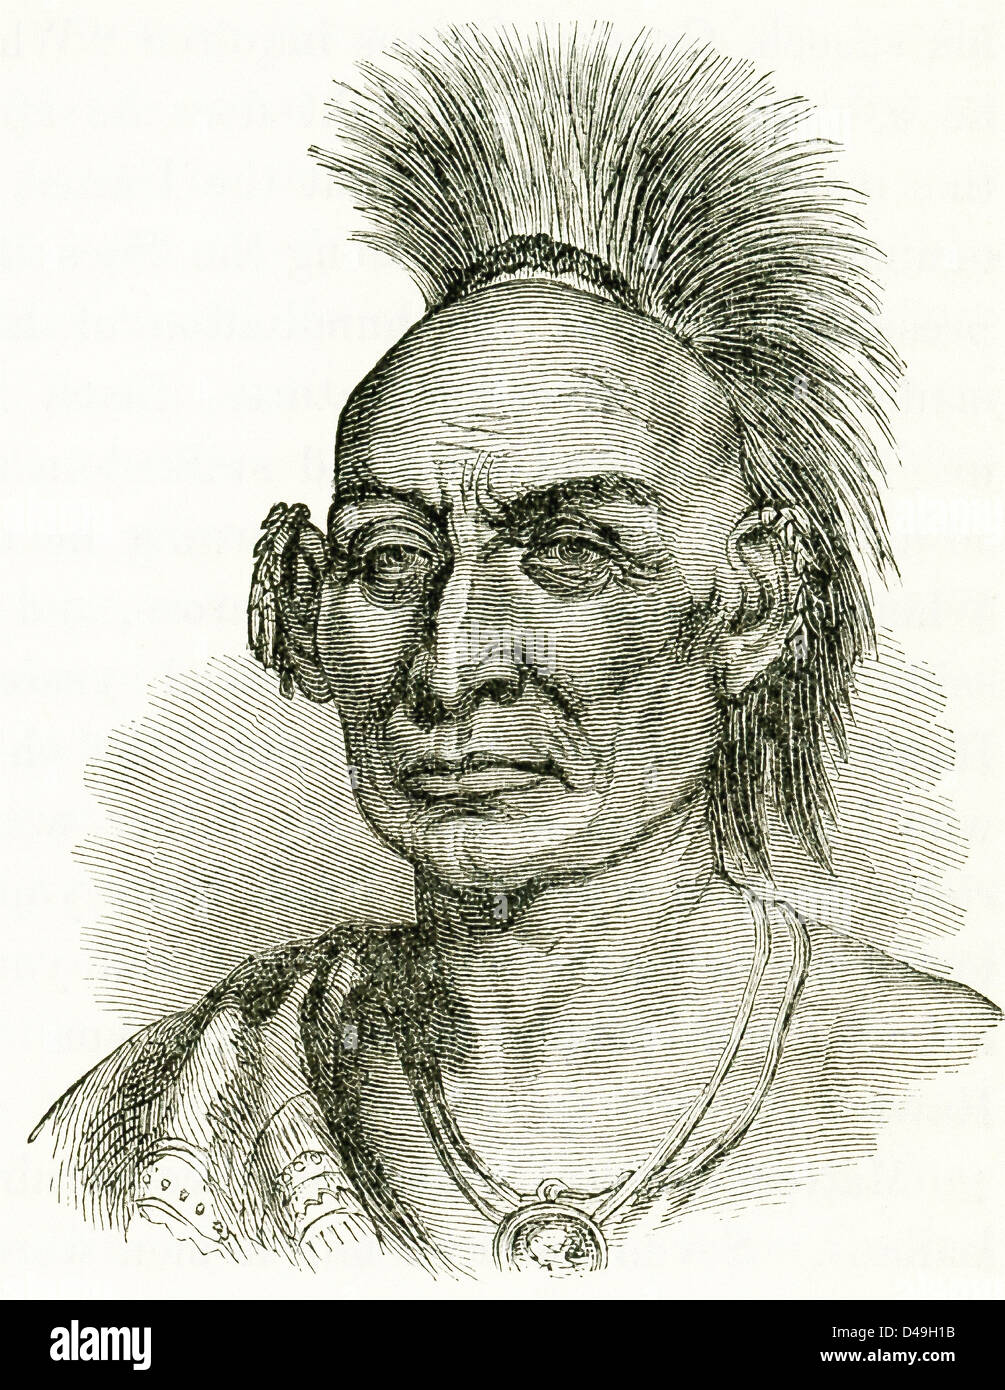 Black Hawk was the leader and warrior of the Sauk American Indian tribe. In the War of 1812, he fought with the British. Stock Photo